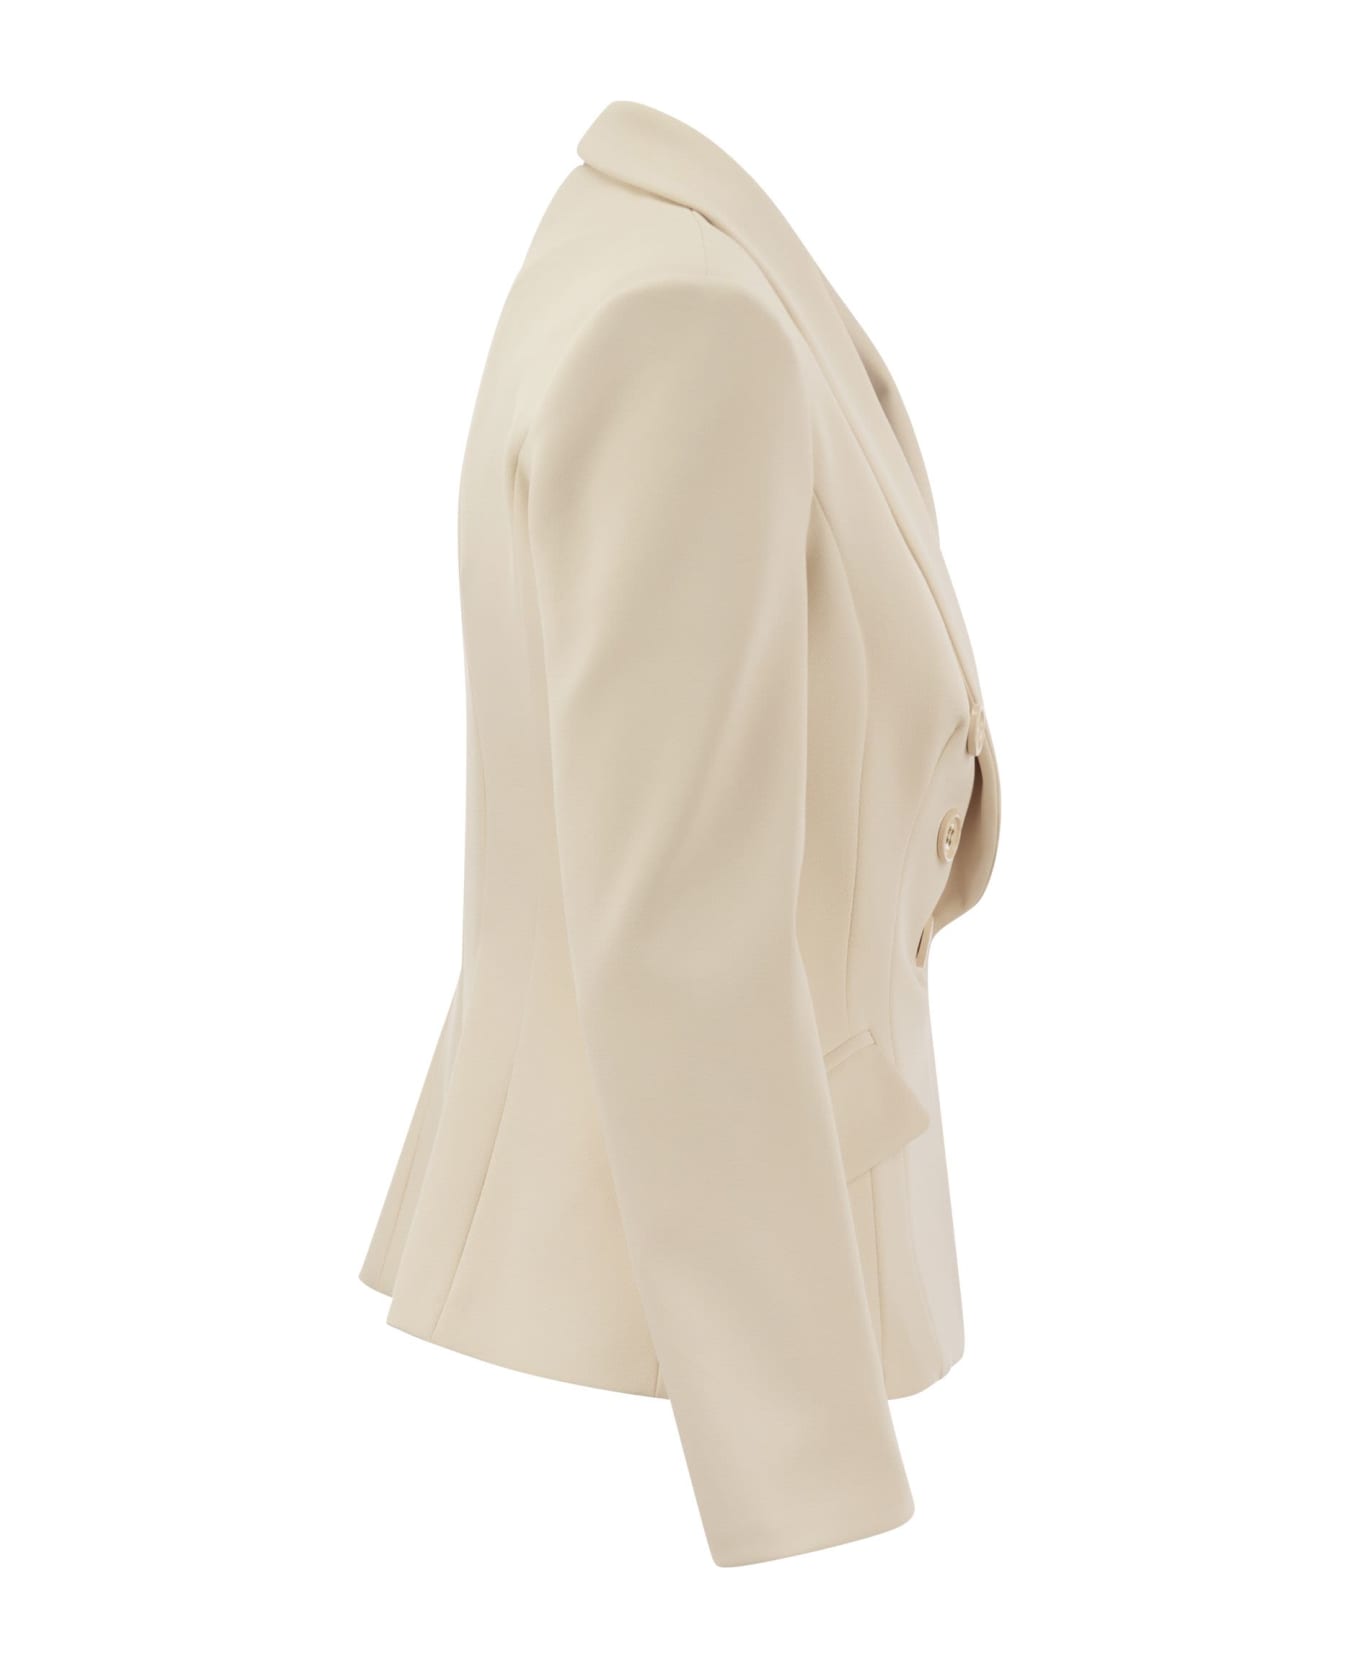 Elisabetta Franchi Double-breasted Crepe Jacket With Shawl Lapels - Butter ブレザー